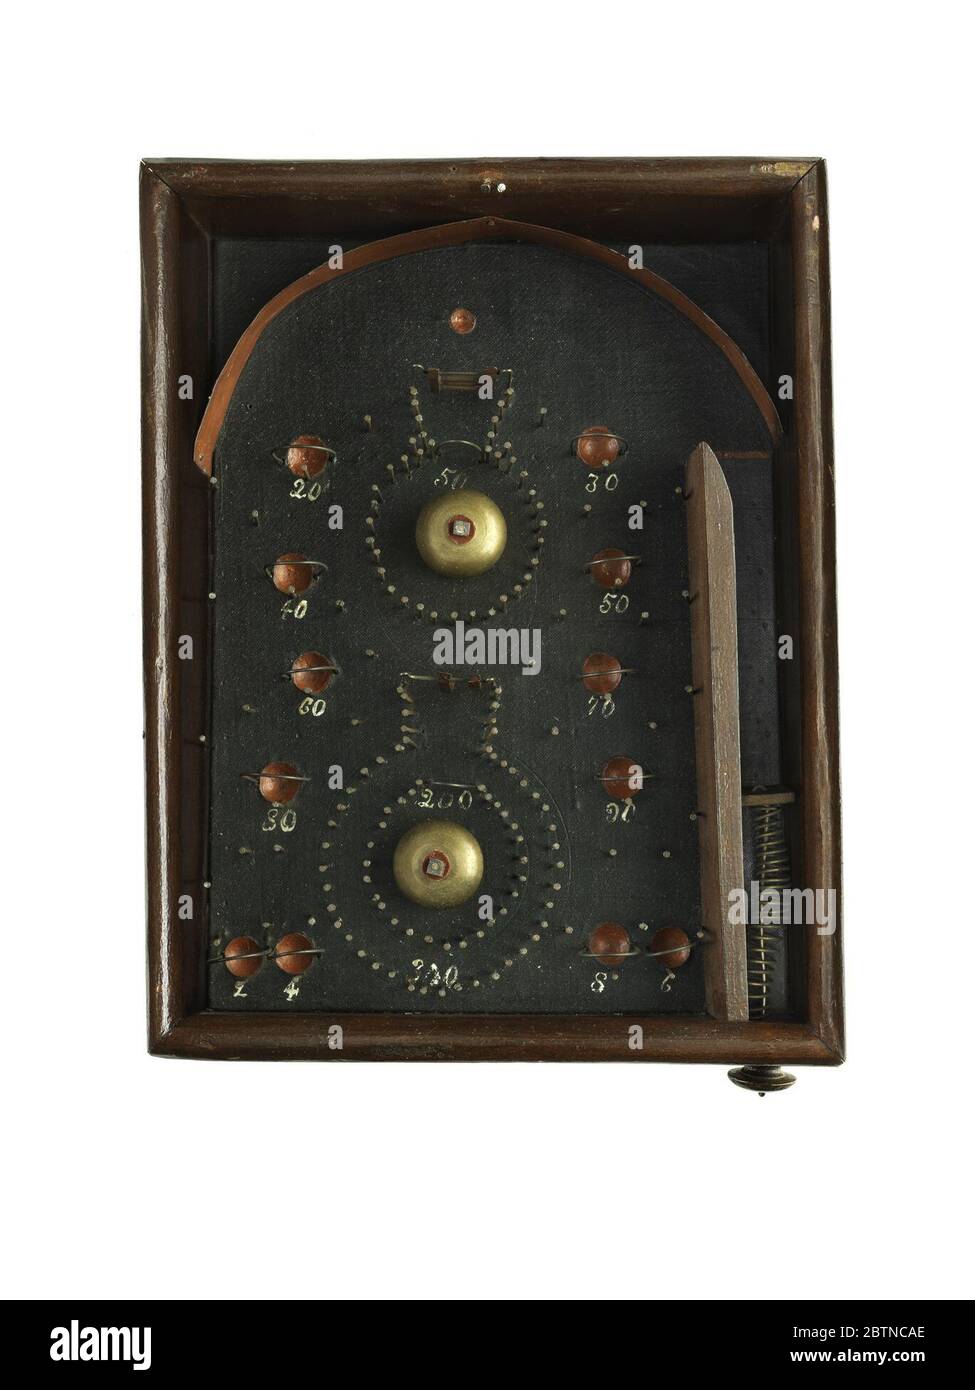 Bagatelle patent model patented by Montague Redgrave. Stock Photo